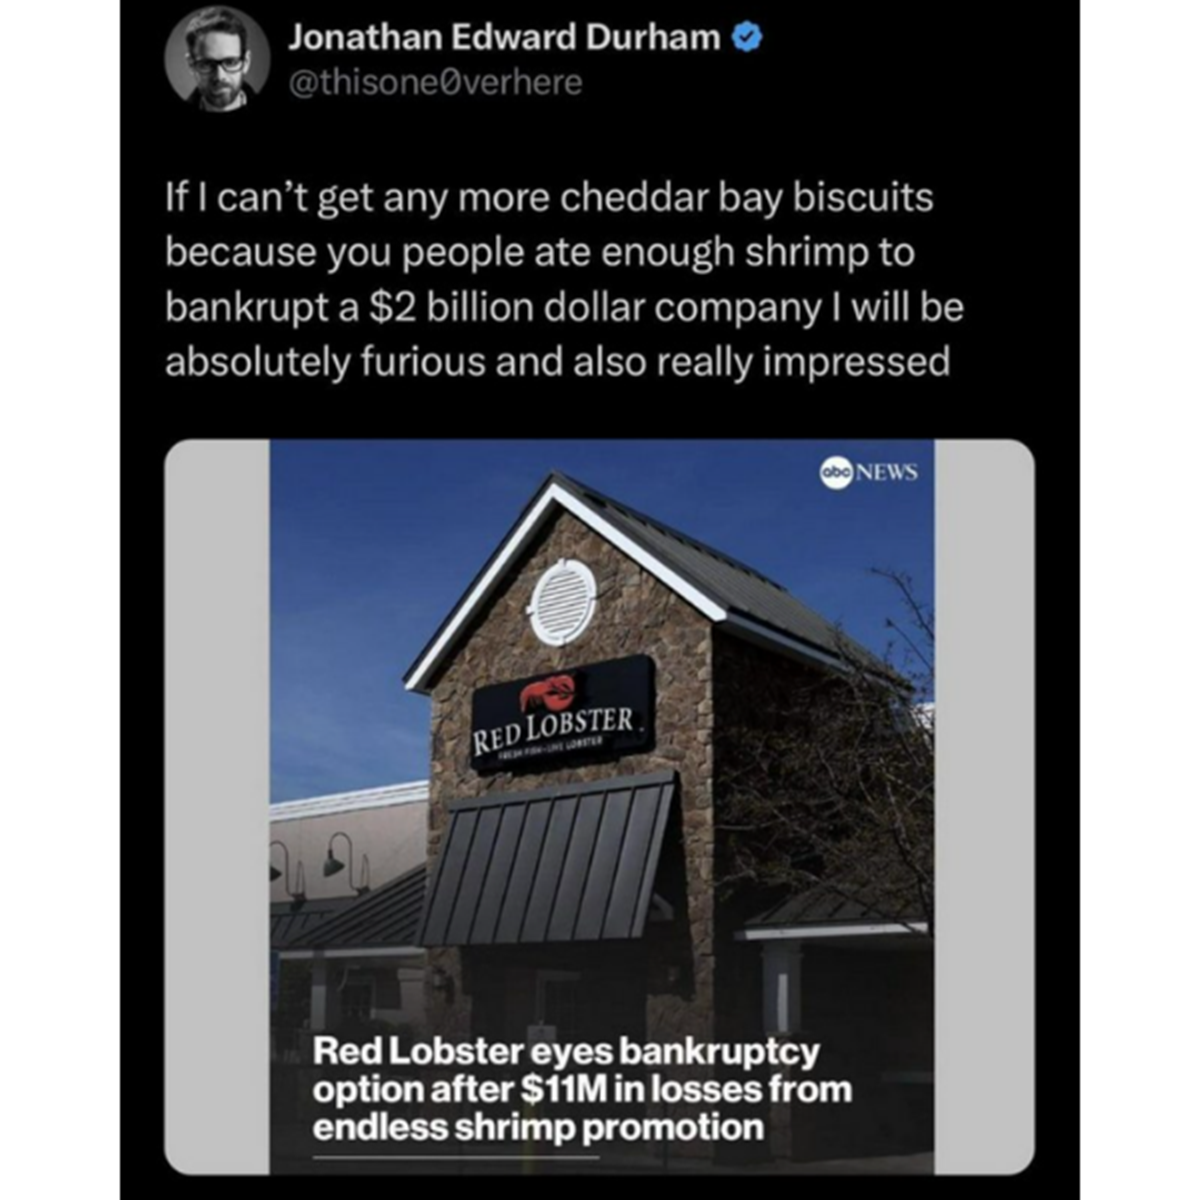 Internet meme - Jonathan Edward Durham verhere If I can't get any more cheddar bay biscuits because you people ate enough shrimp to bankrupt a $2 billion dollar company I will be absolutely furious and also really impressed Red Lobster Red Lobster eyes ba